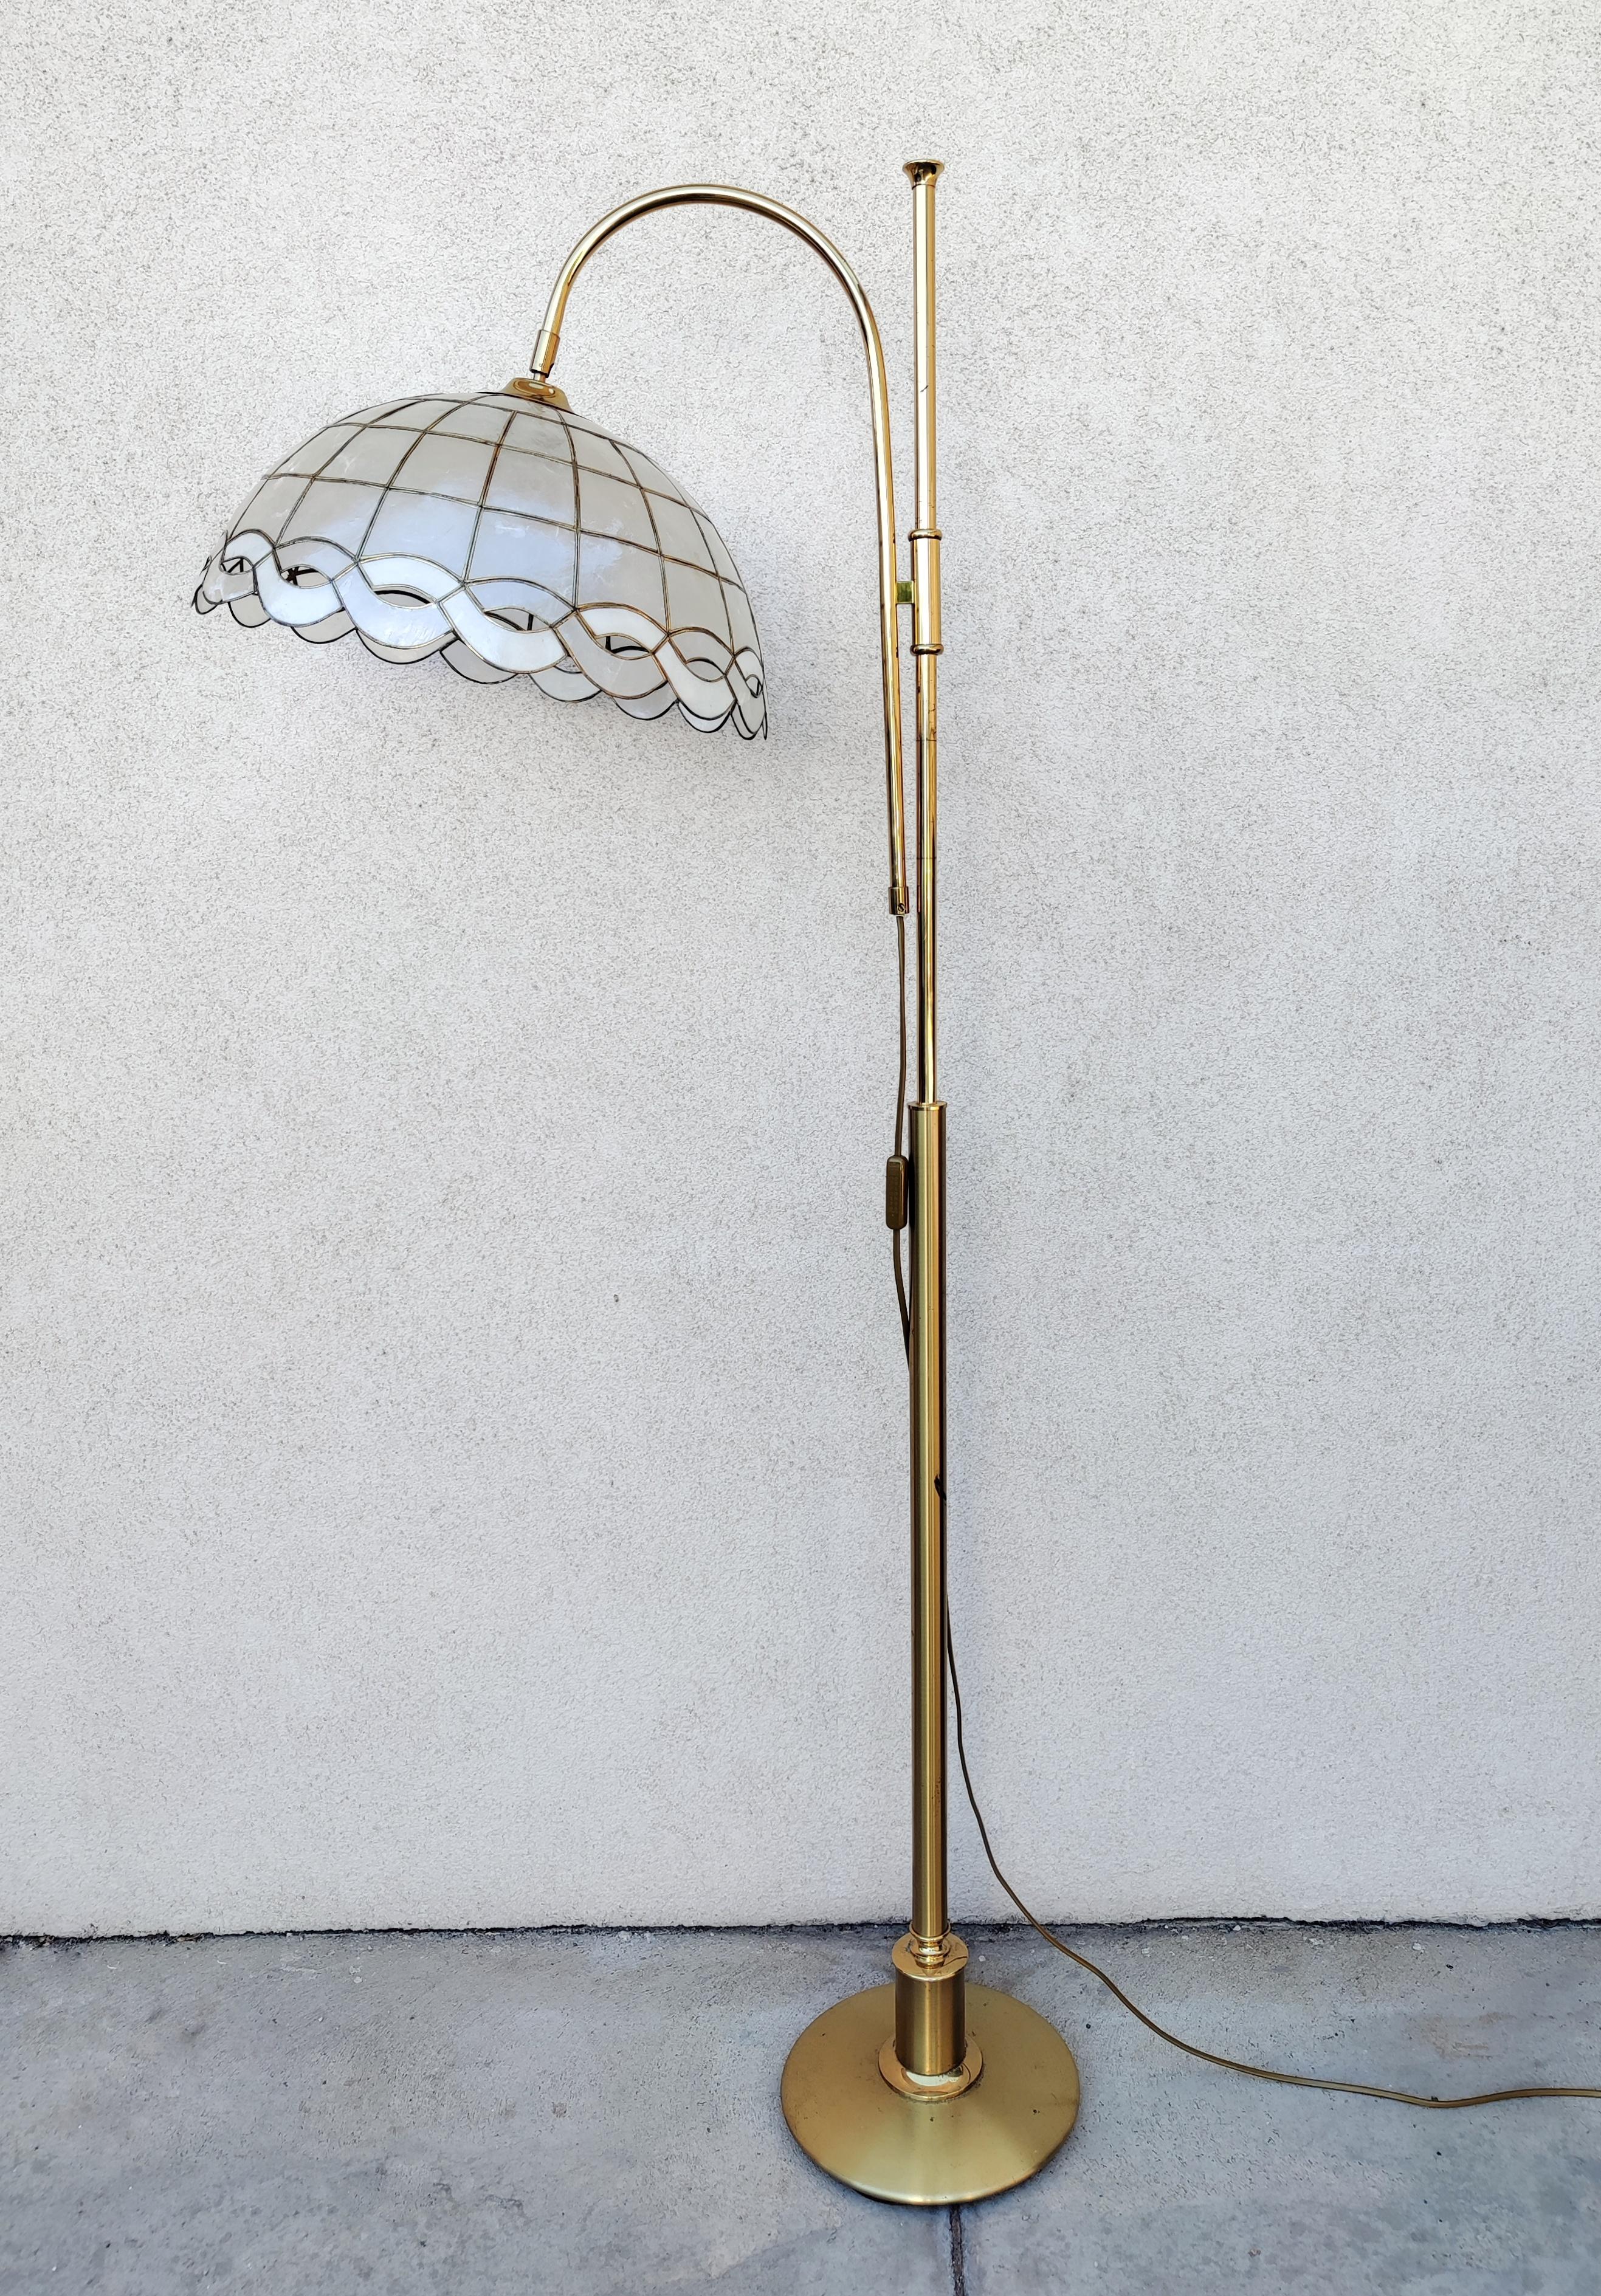 In this listing you will find a striking Mid Century Modern Floor Lamp done in brass with gorgeous Capiz shell shade, which provides beautiful light. Made in West Germany by Fischer Leuchten in 1970s.

The lamp is in very good vintage condition with